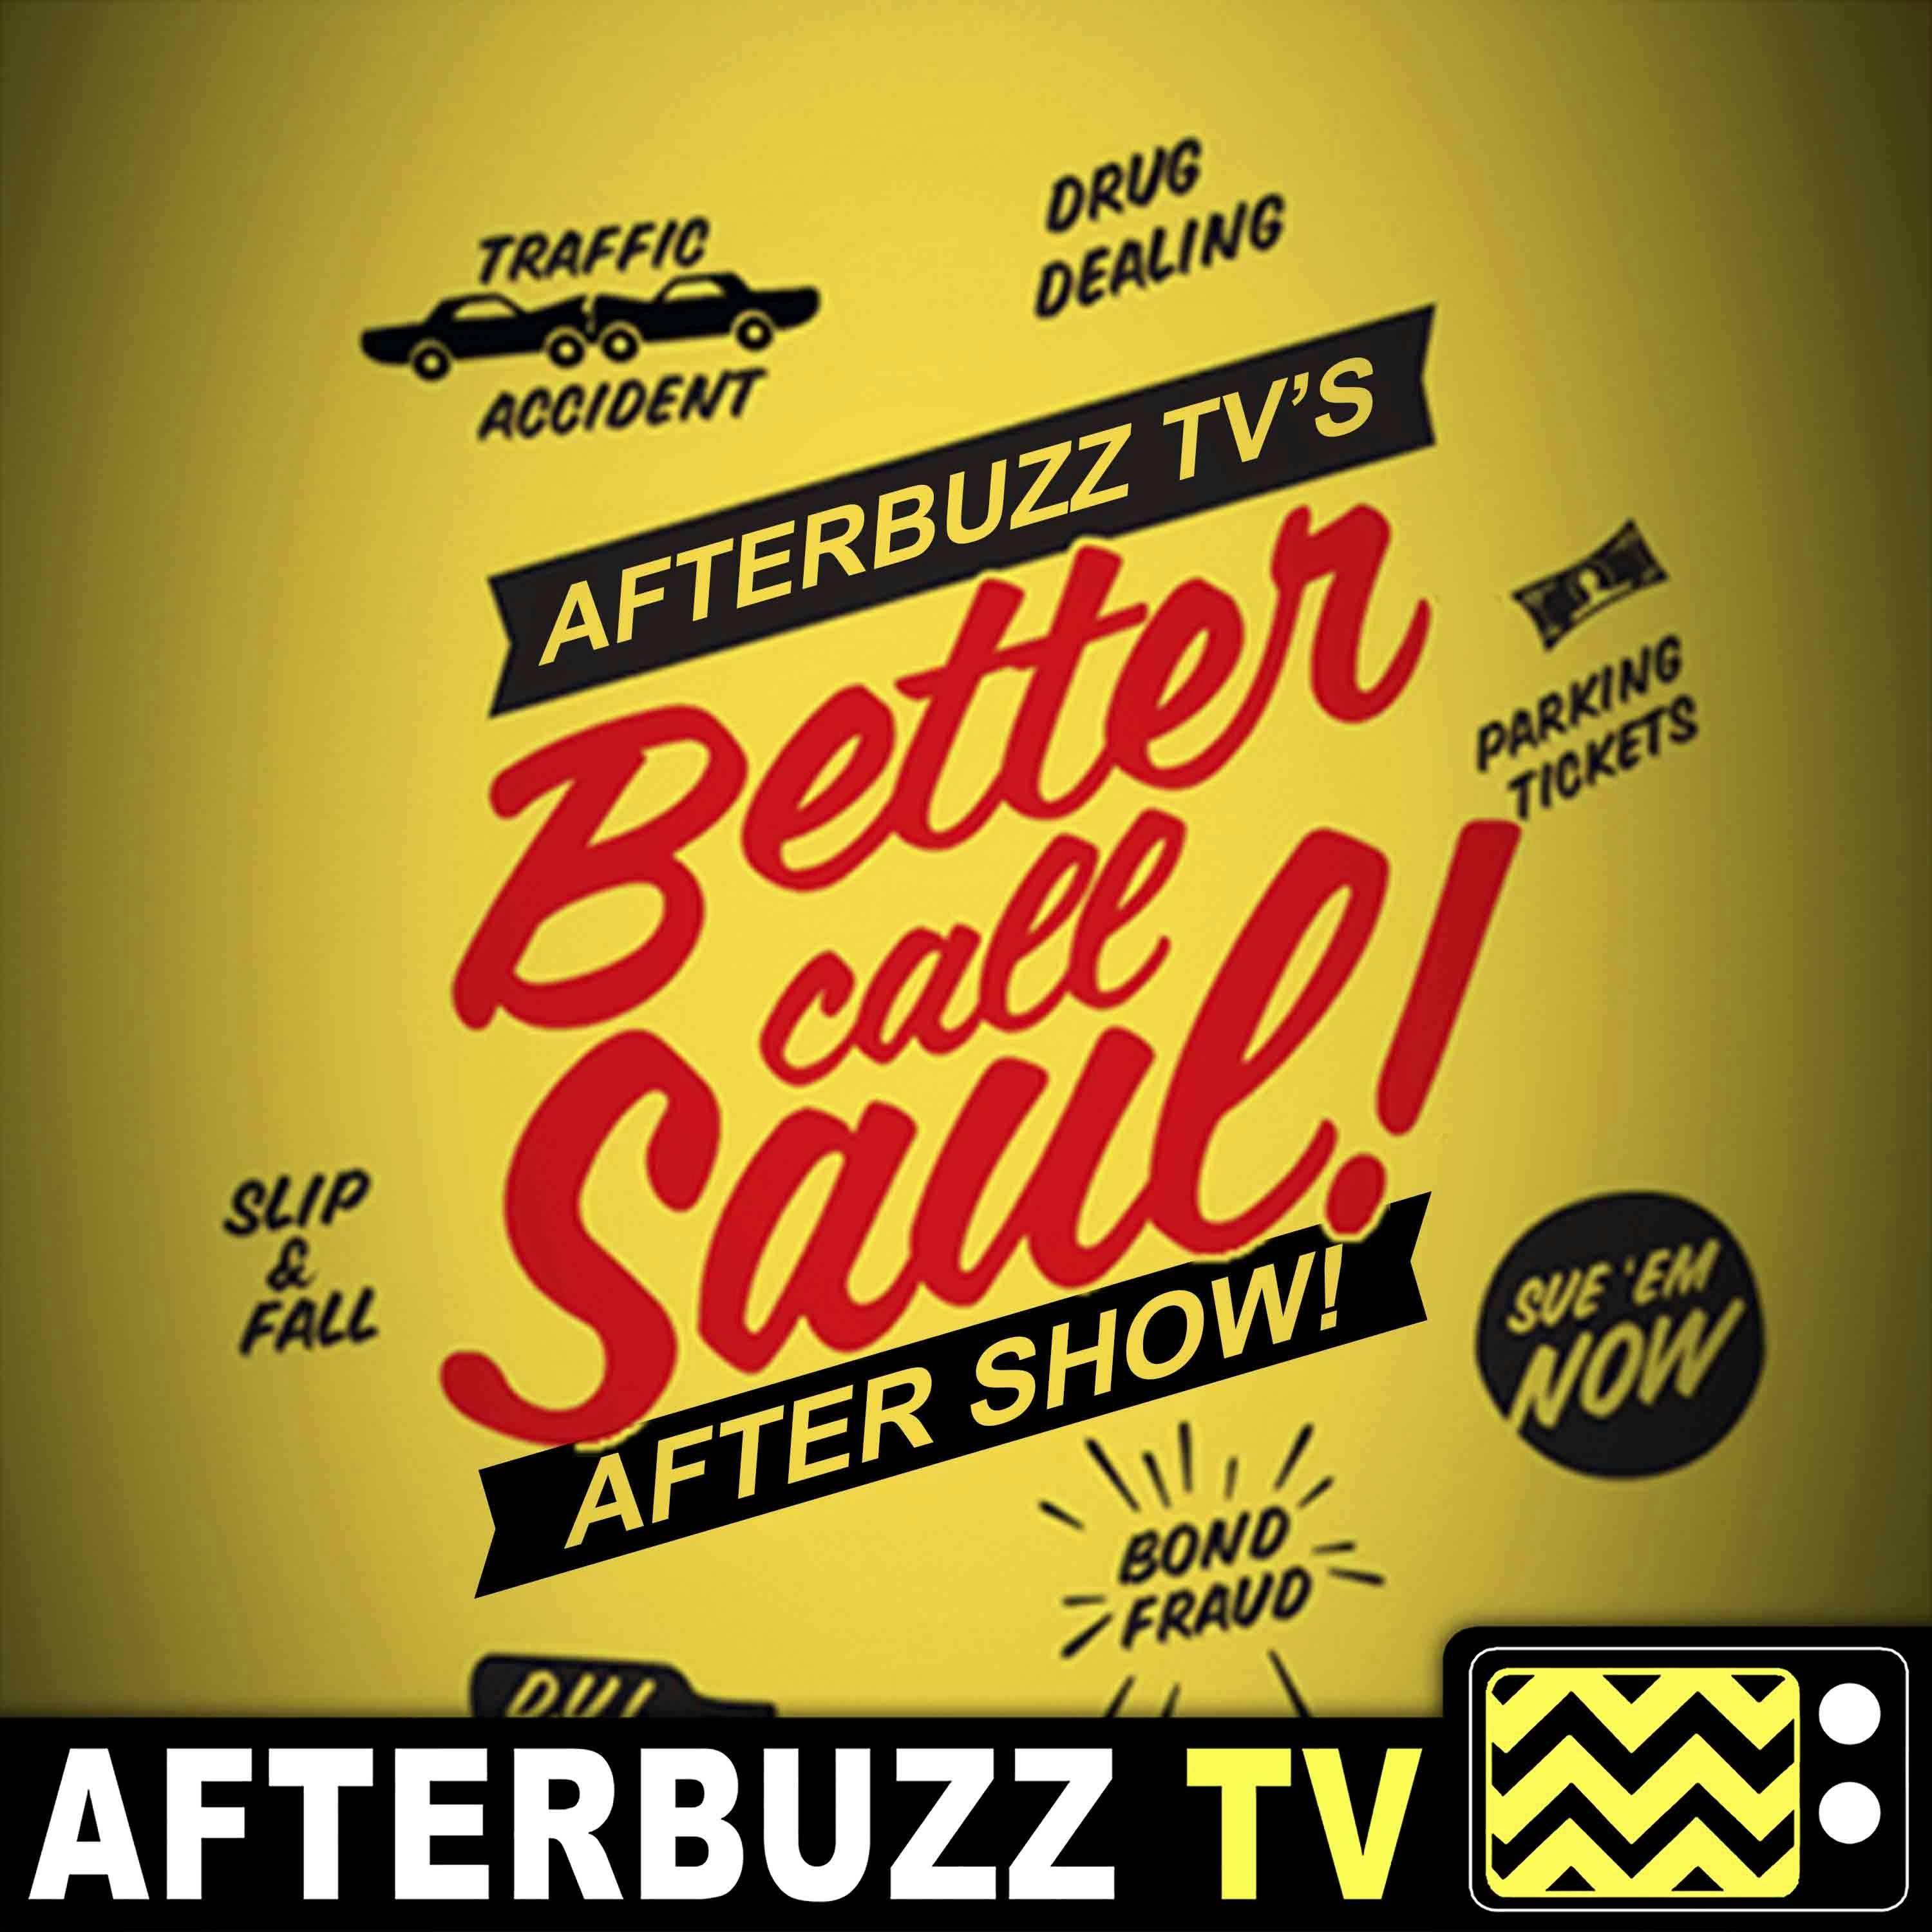 Better Call Saul S:2 | Nailed E:9 | AfterBuzz TV AfterShow